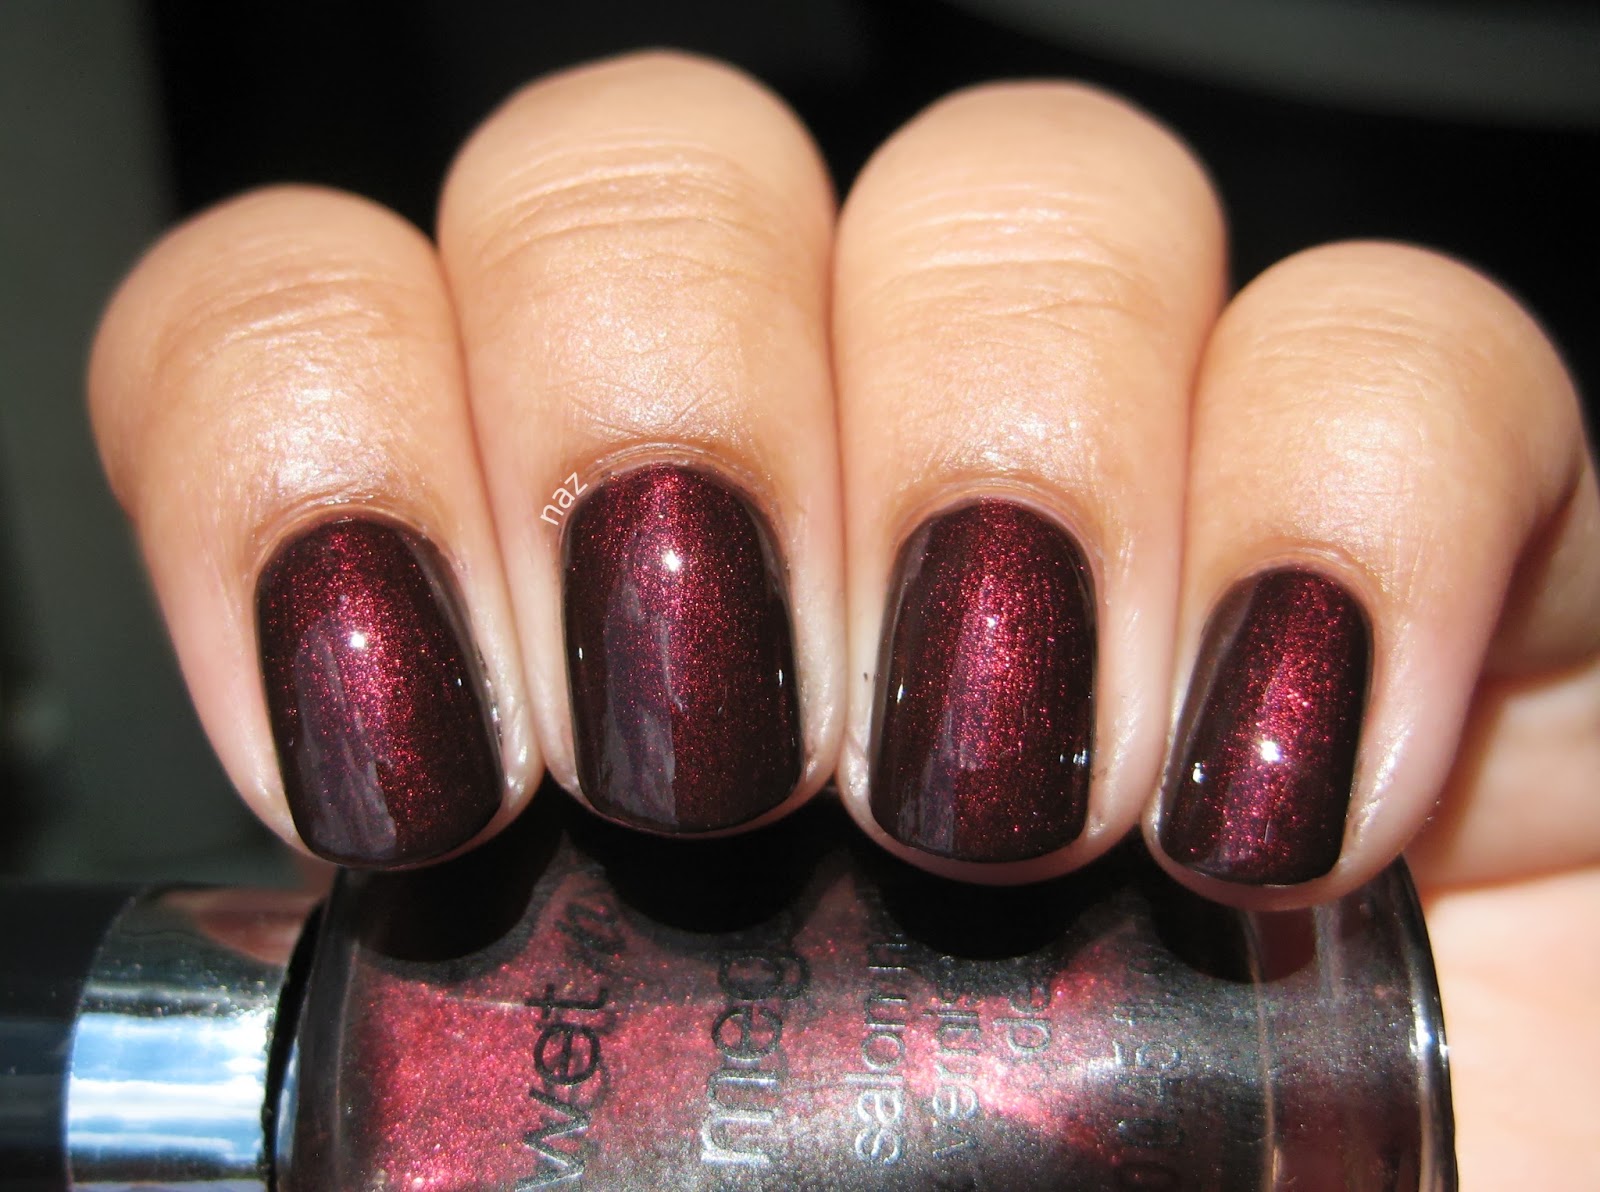 Wet n Wild Megalast Nail Polish in "Under Your Spell" - wide 7